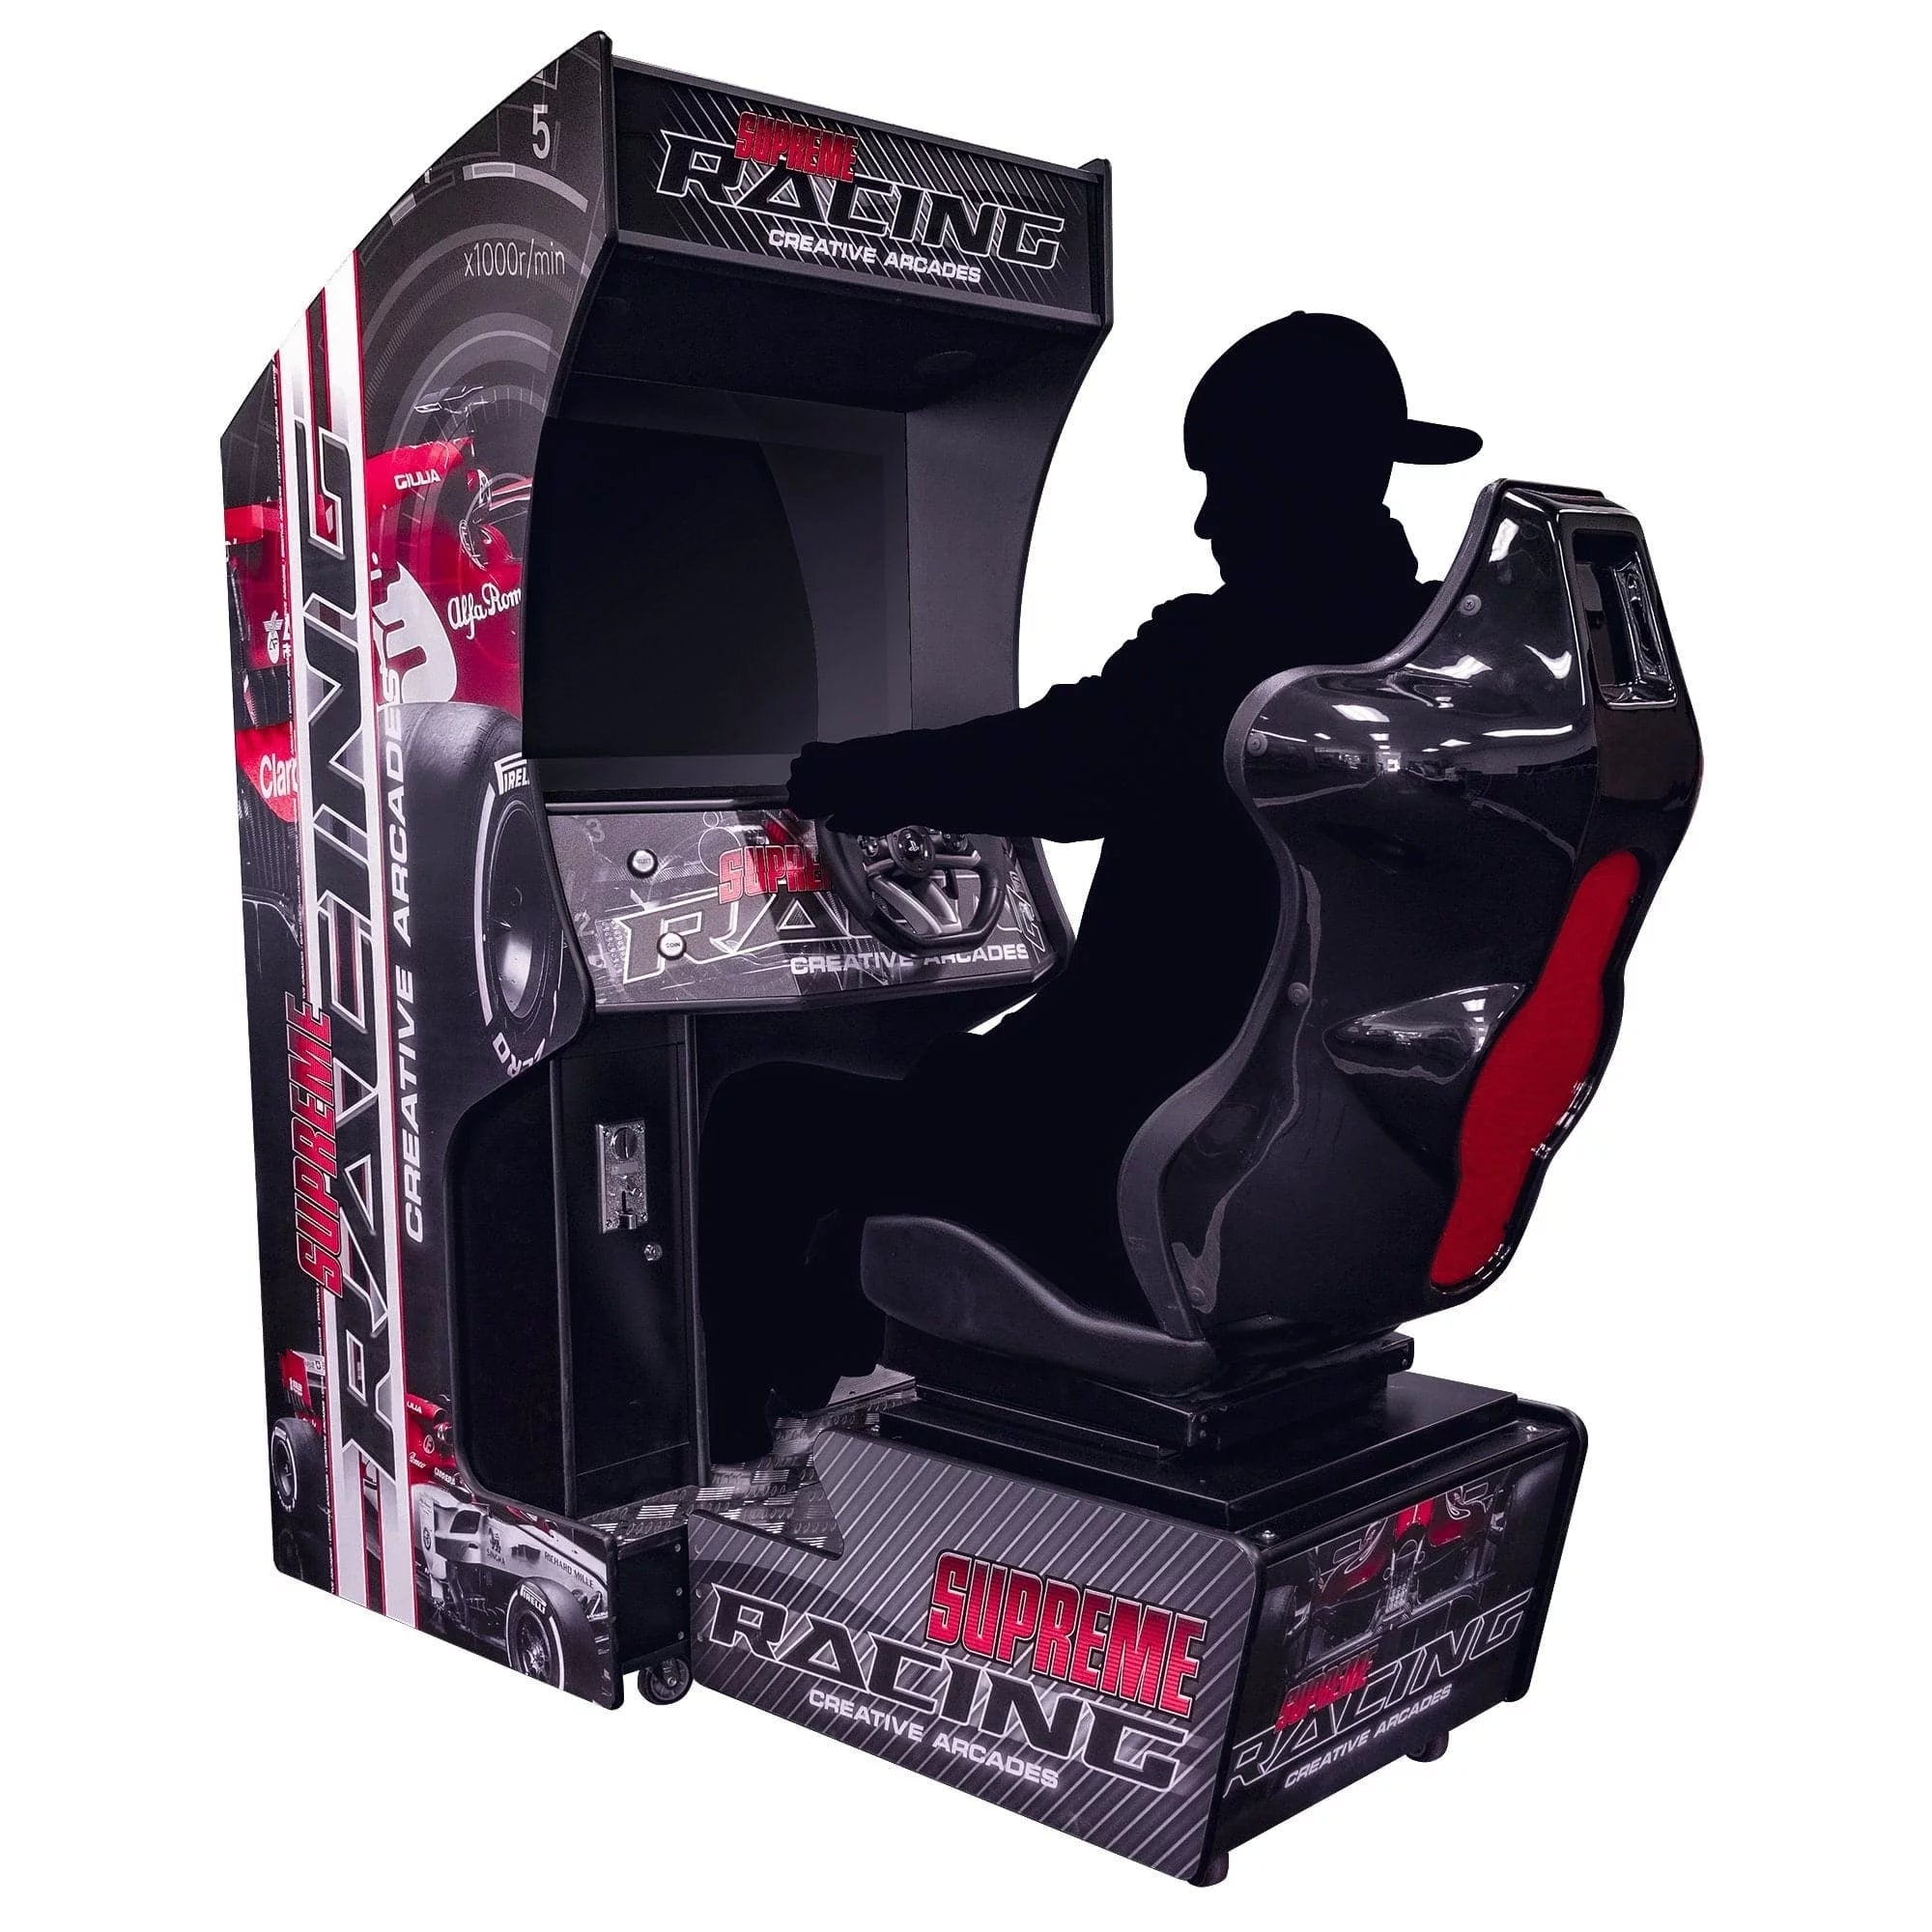 Racing Sit Down Arcade Machine | 129 Racing Games | 32" LCD Monitor | Authentic Steering Wheel & Pedals